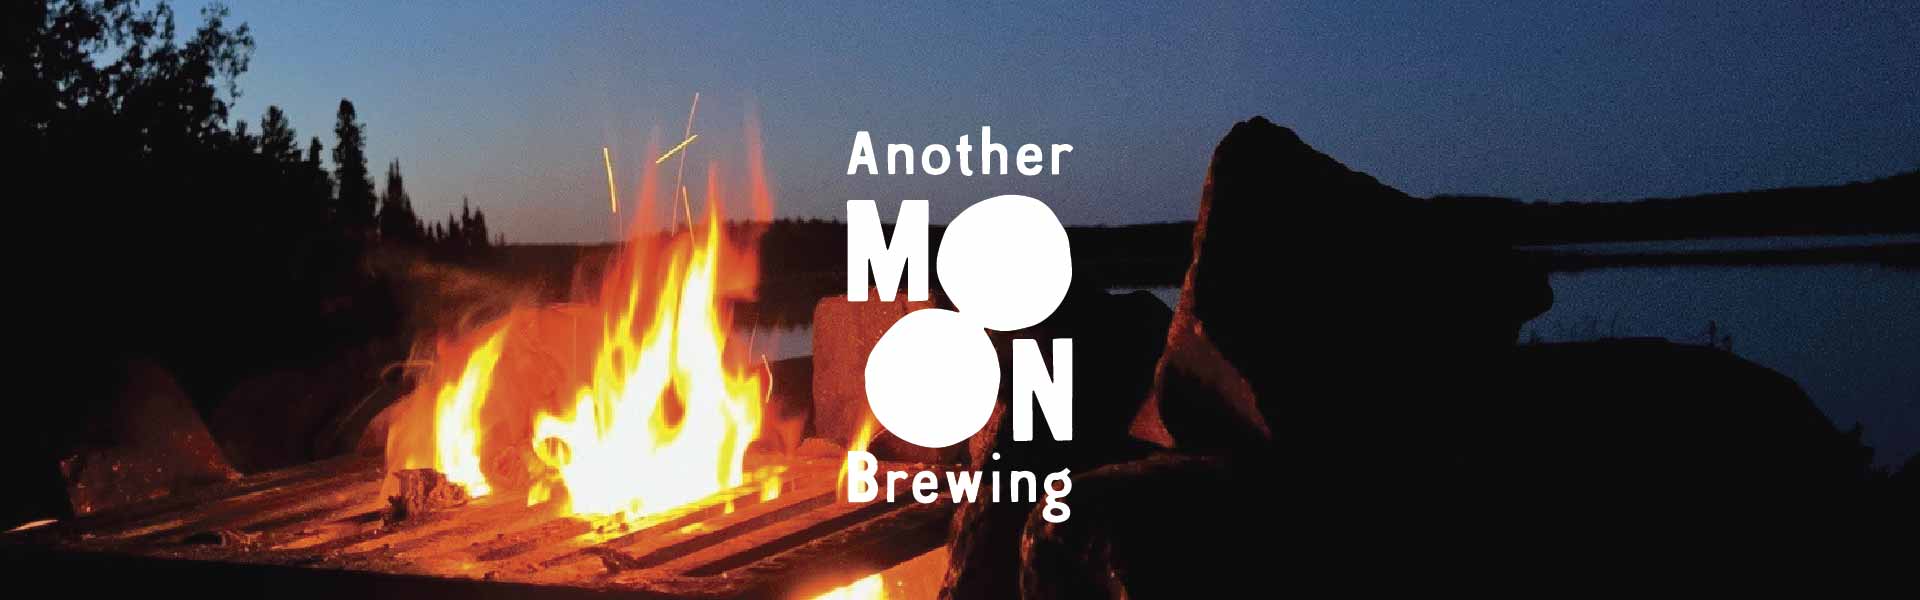 Another Moon Brewing Company